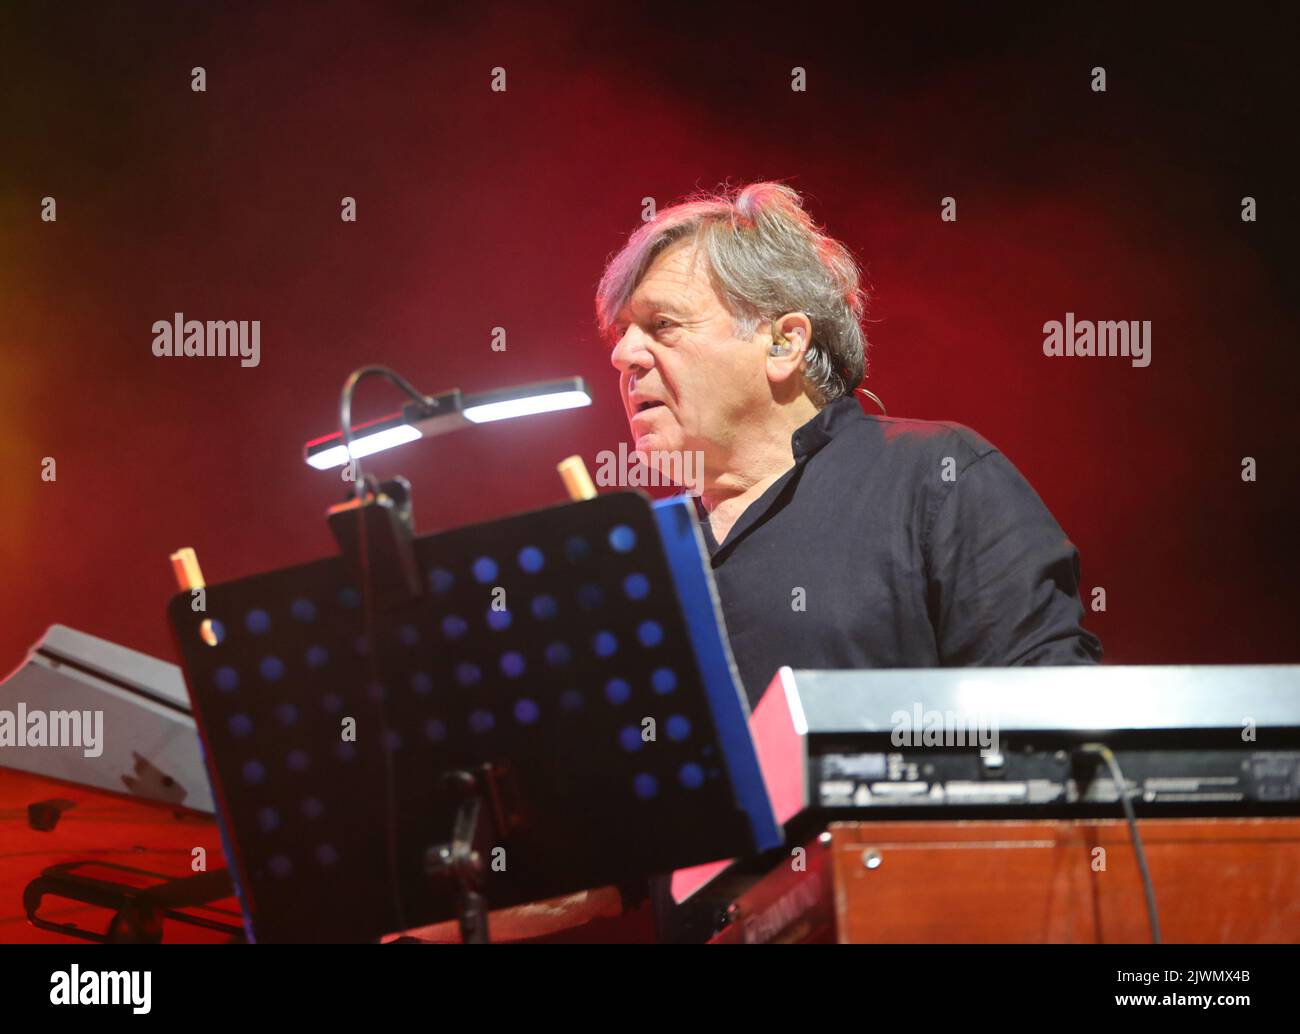 Vicenza, VI, Italy - September 4, 2022: Live Concert of an Italian band called NOMADI and BEPPE CARLETTI leader and piano player Stock Photo